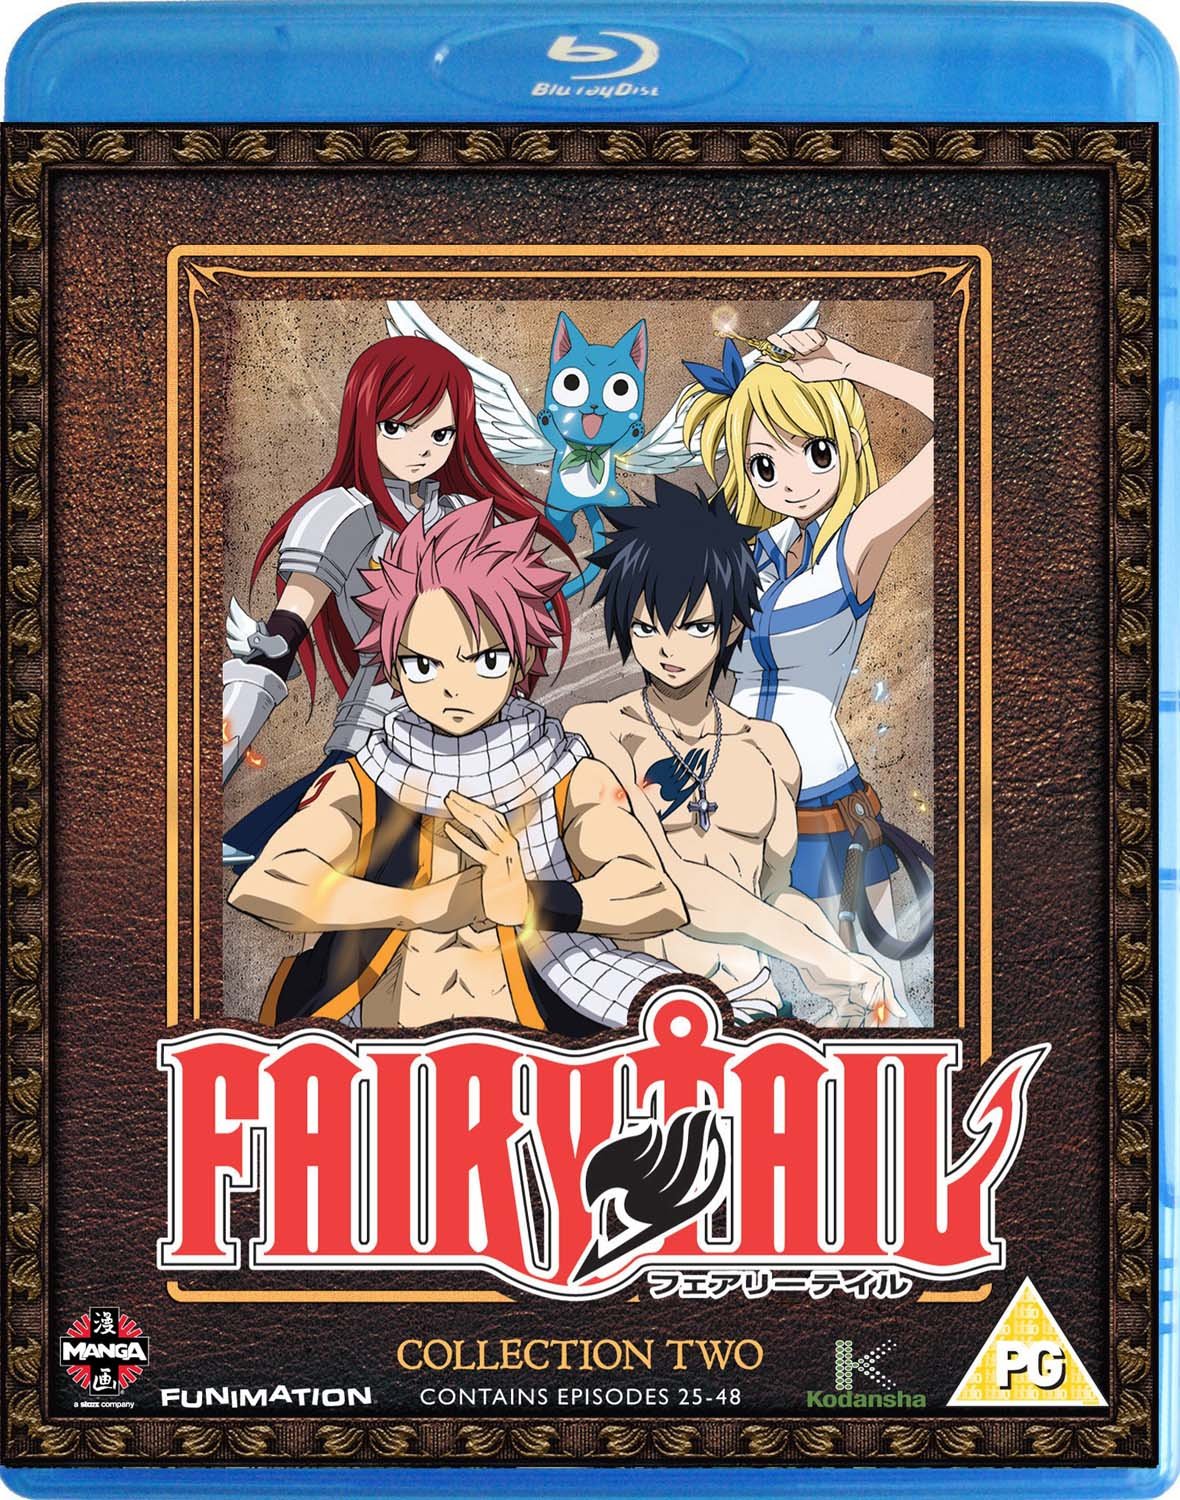 Fairy Tail: Collection 2 [Blu-ray]